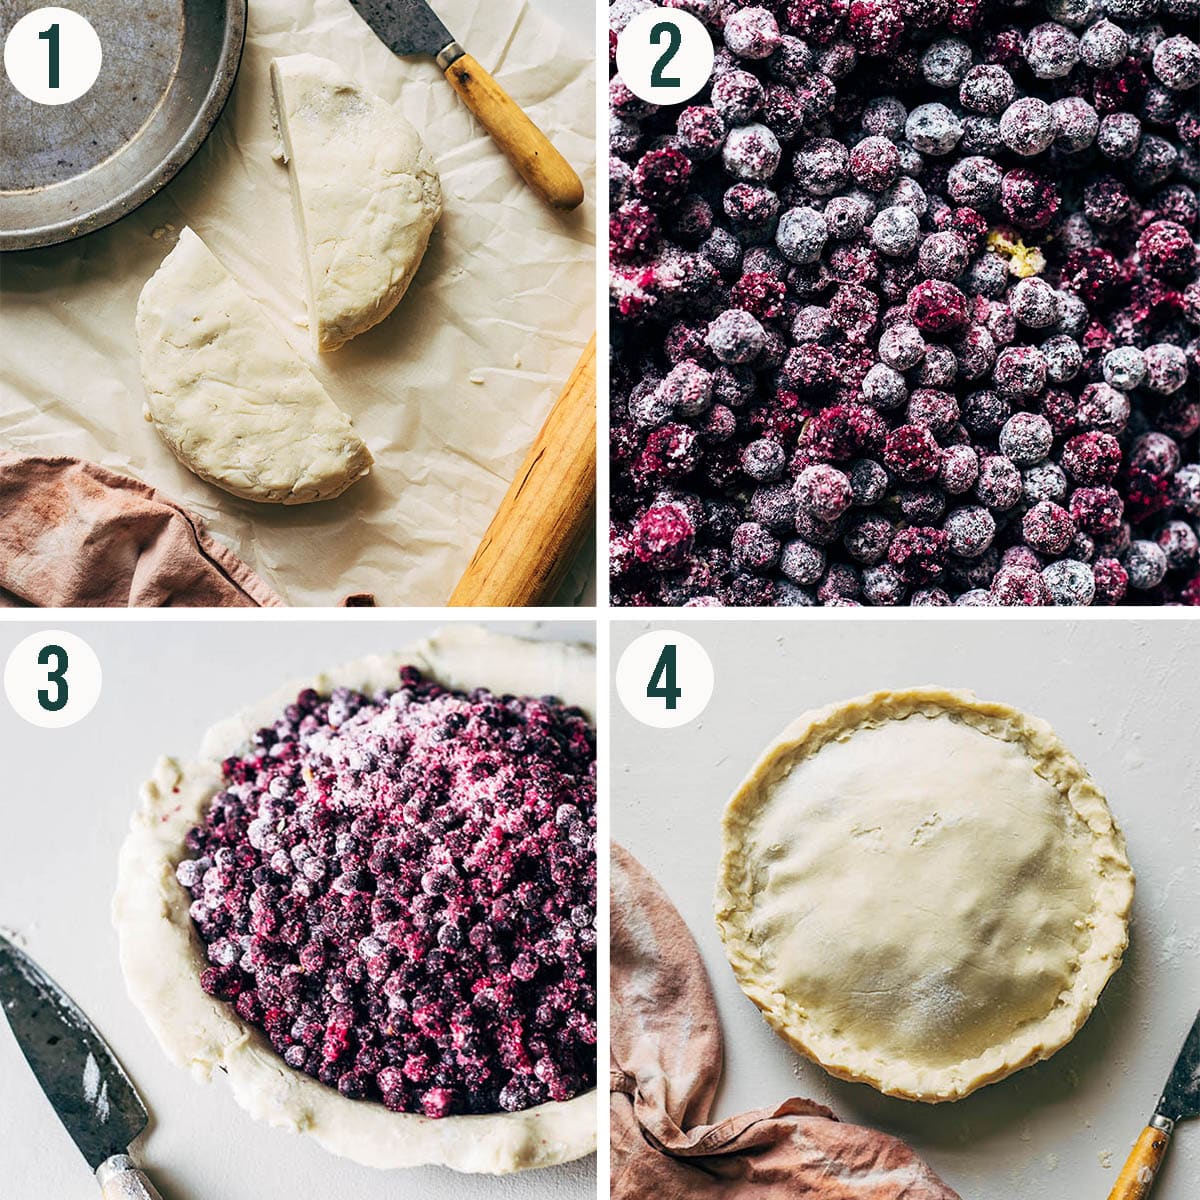 Blueberry pie steps 1 to 4, dough being dividing, mixing the filling, adding the filling, top crust added.